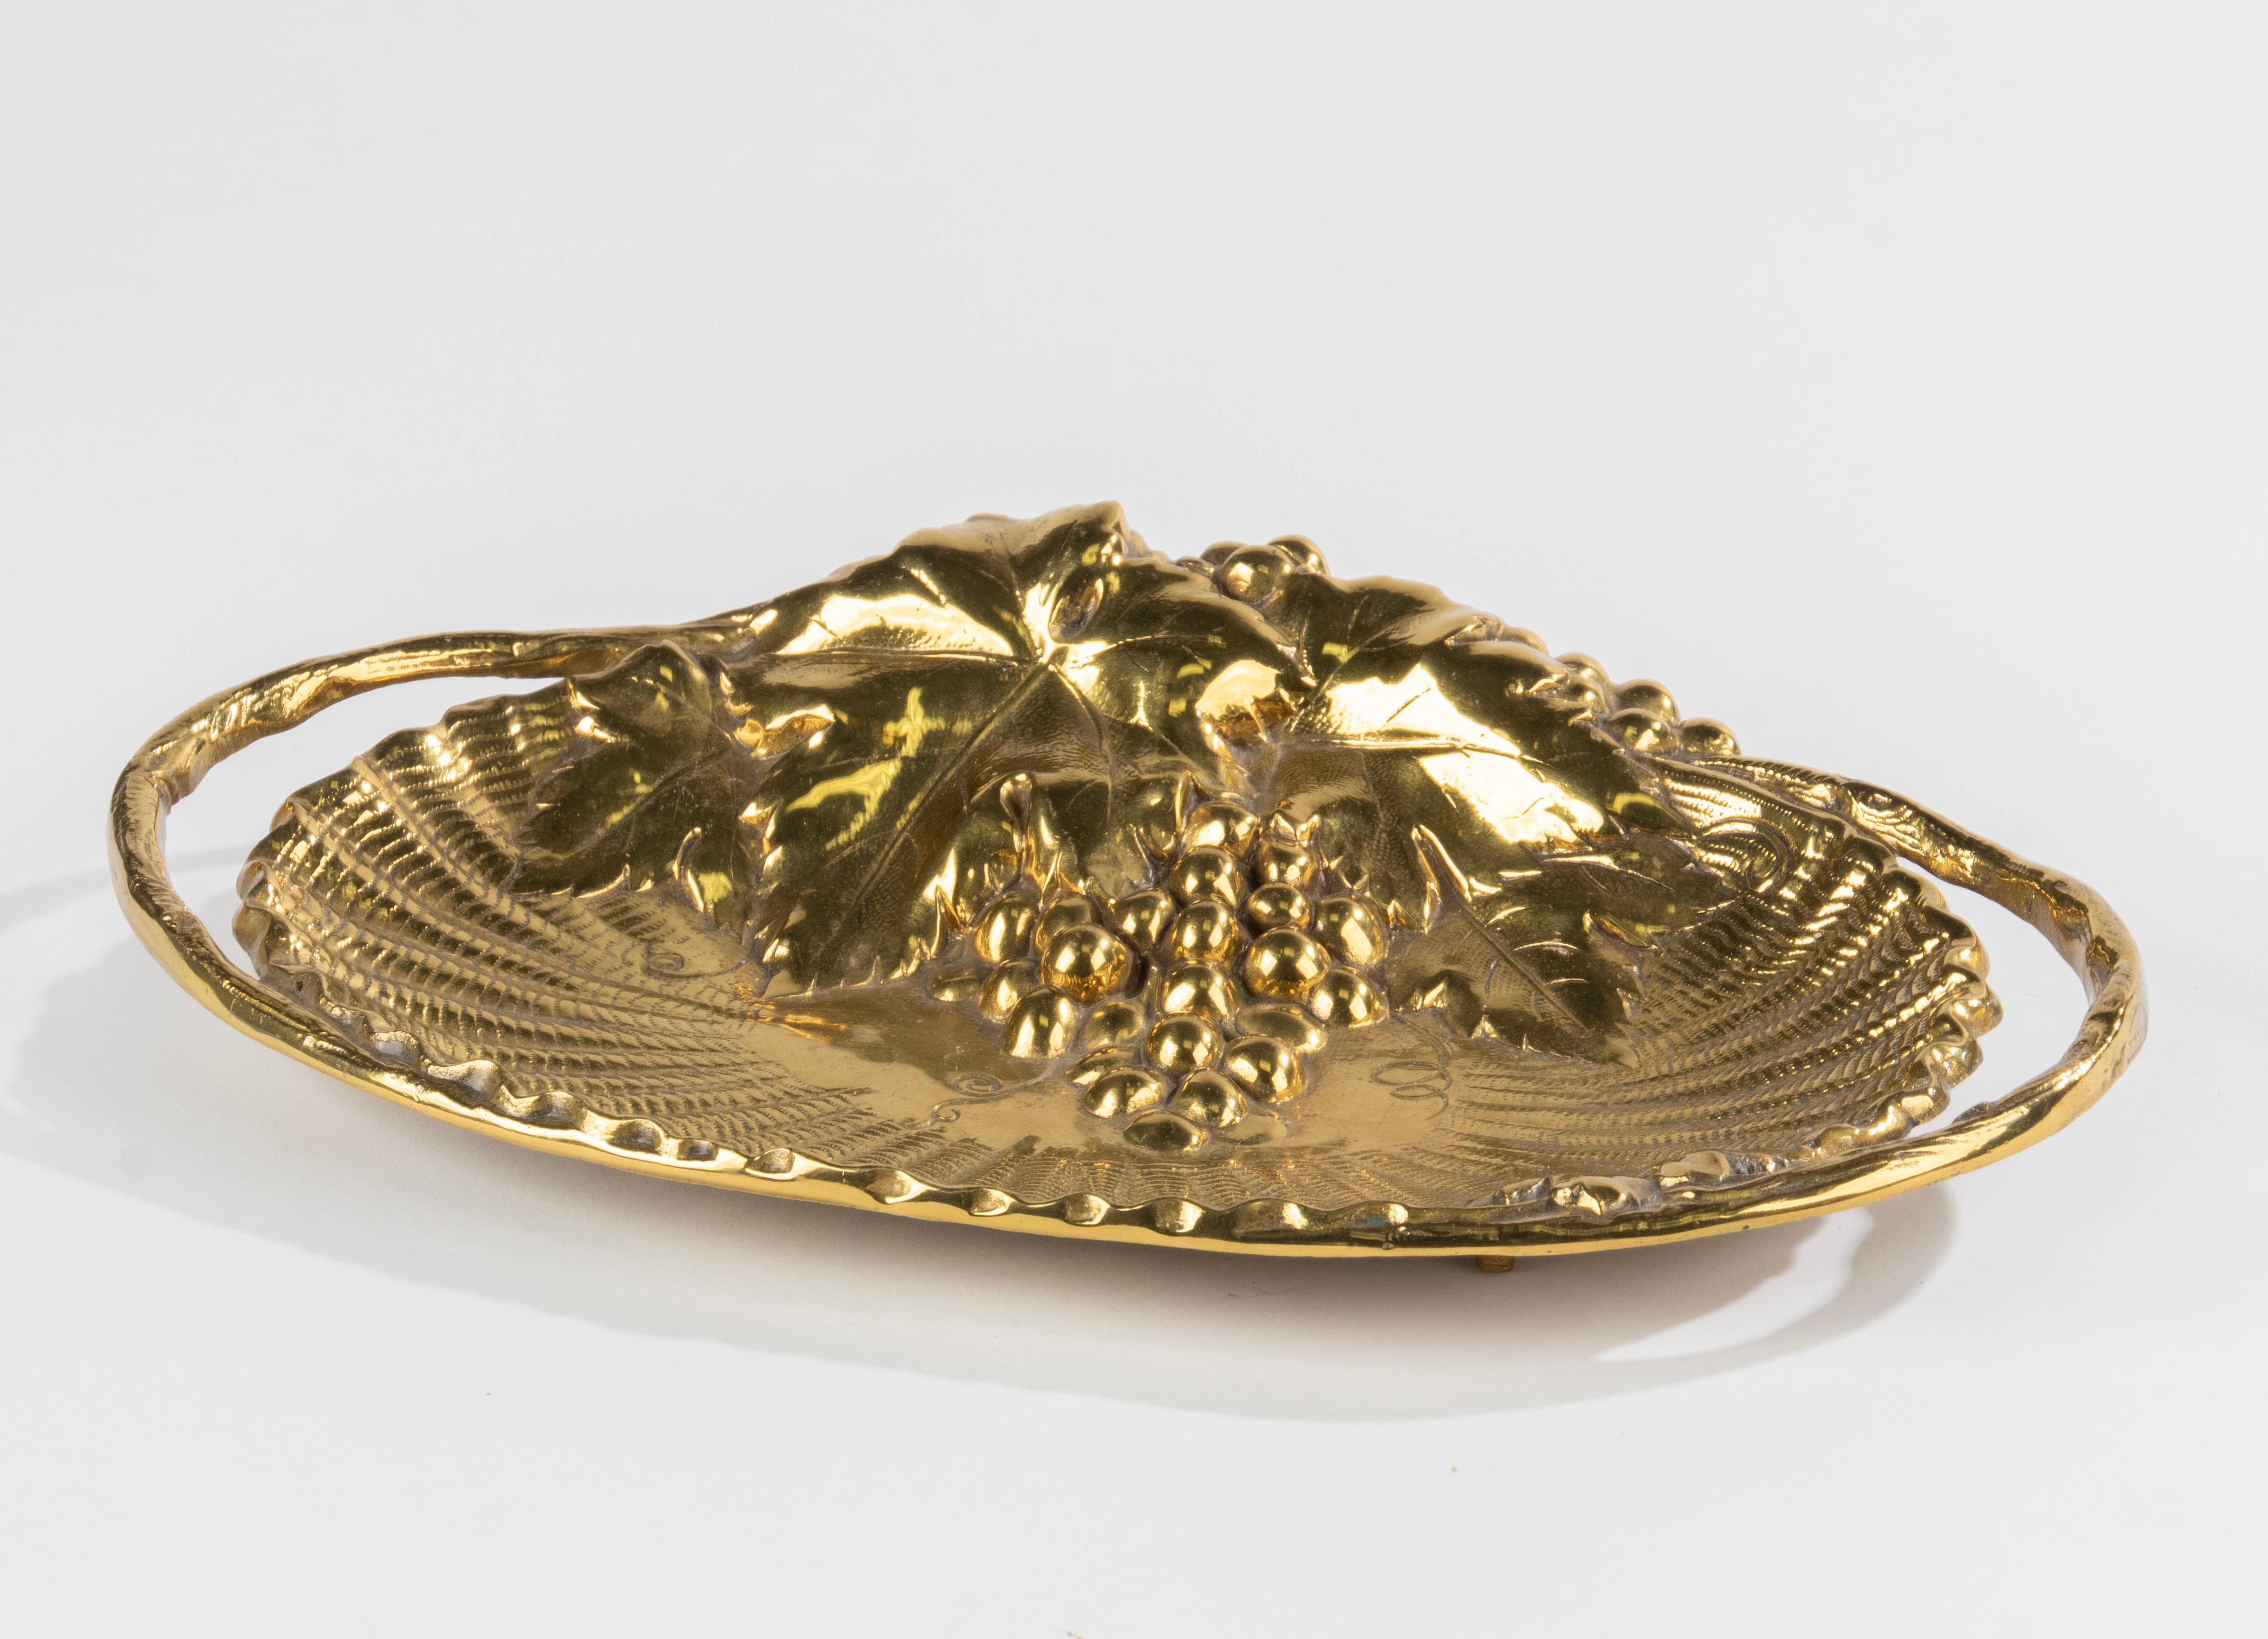 A beautiful decorative copper / brass serving dish. 
Dimensions: 34 x 21 cm and 5 cm tall. 
Free shipping worldwide. 